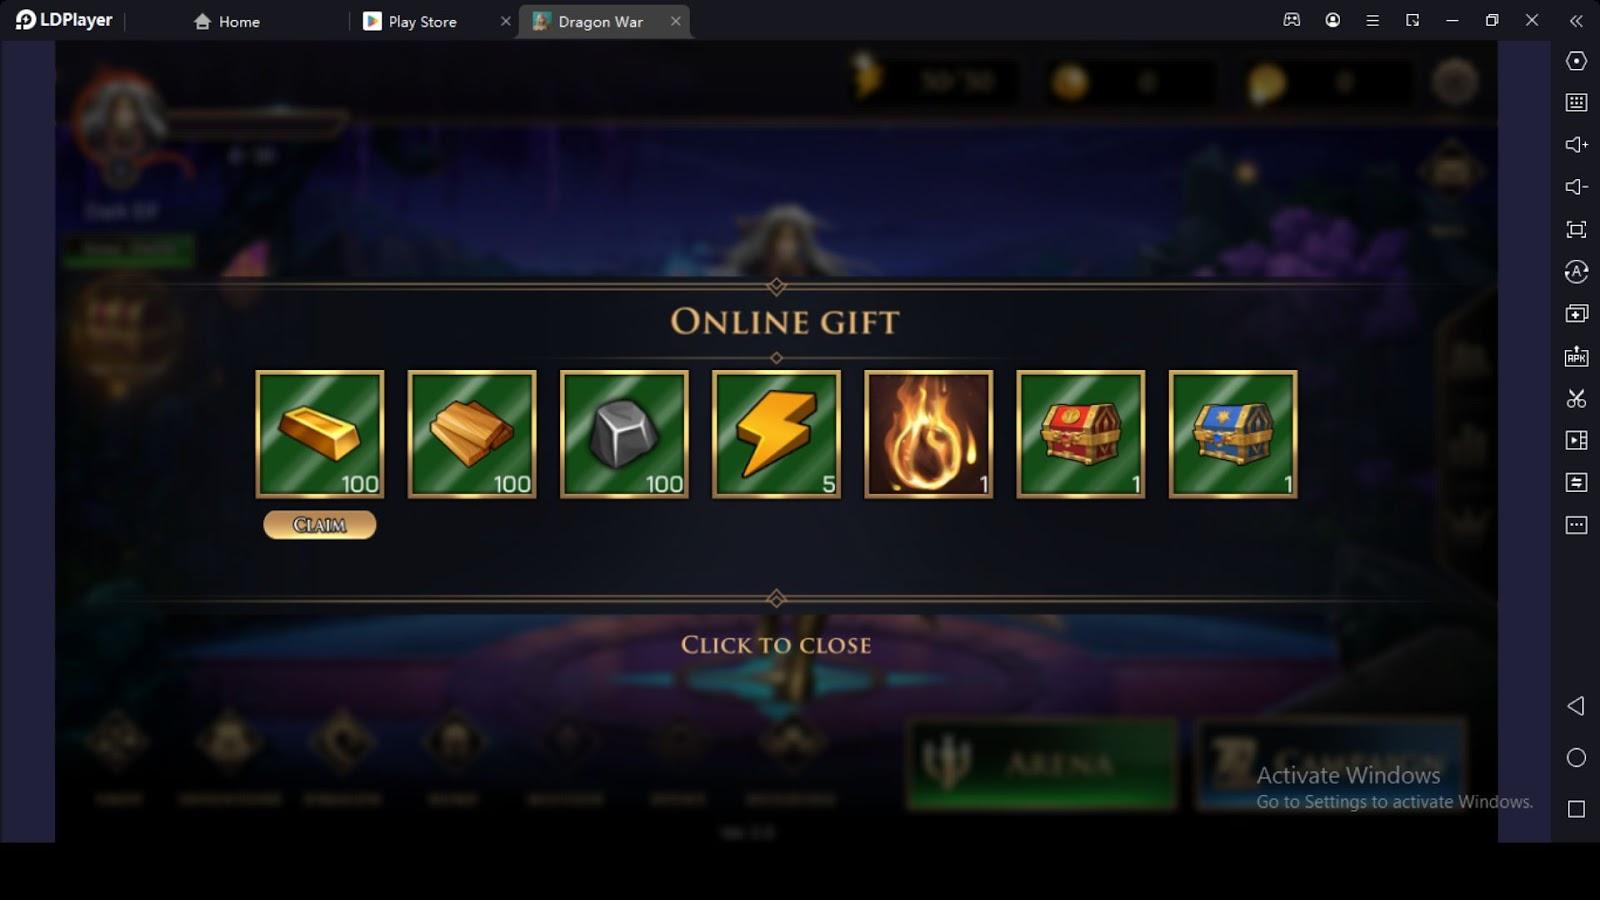 Claim Gifts for Being Online